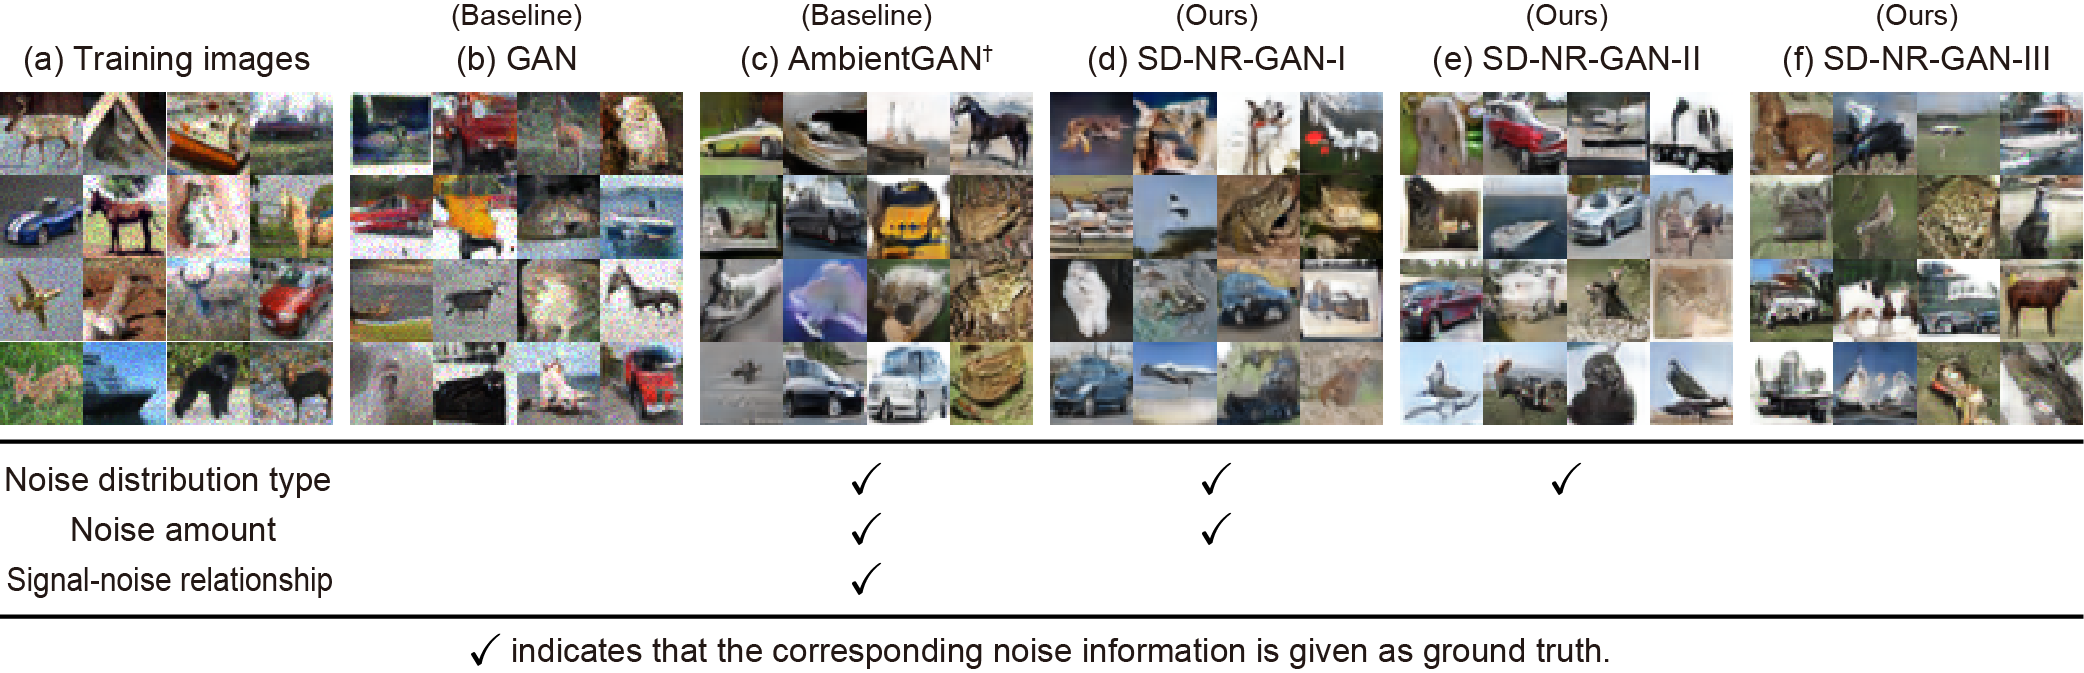 Examples of generated images on CIFAR-10 with multiplicative Gaussian noise